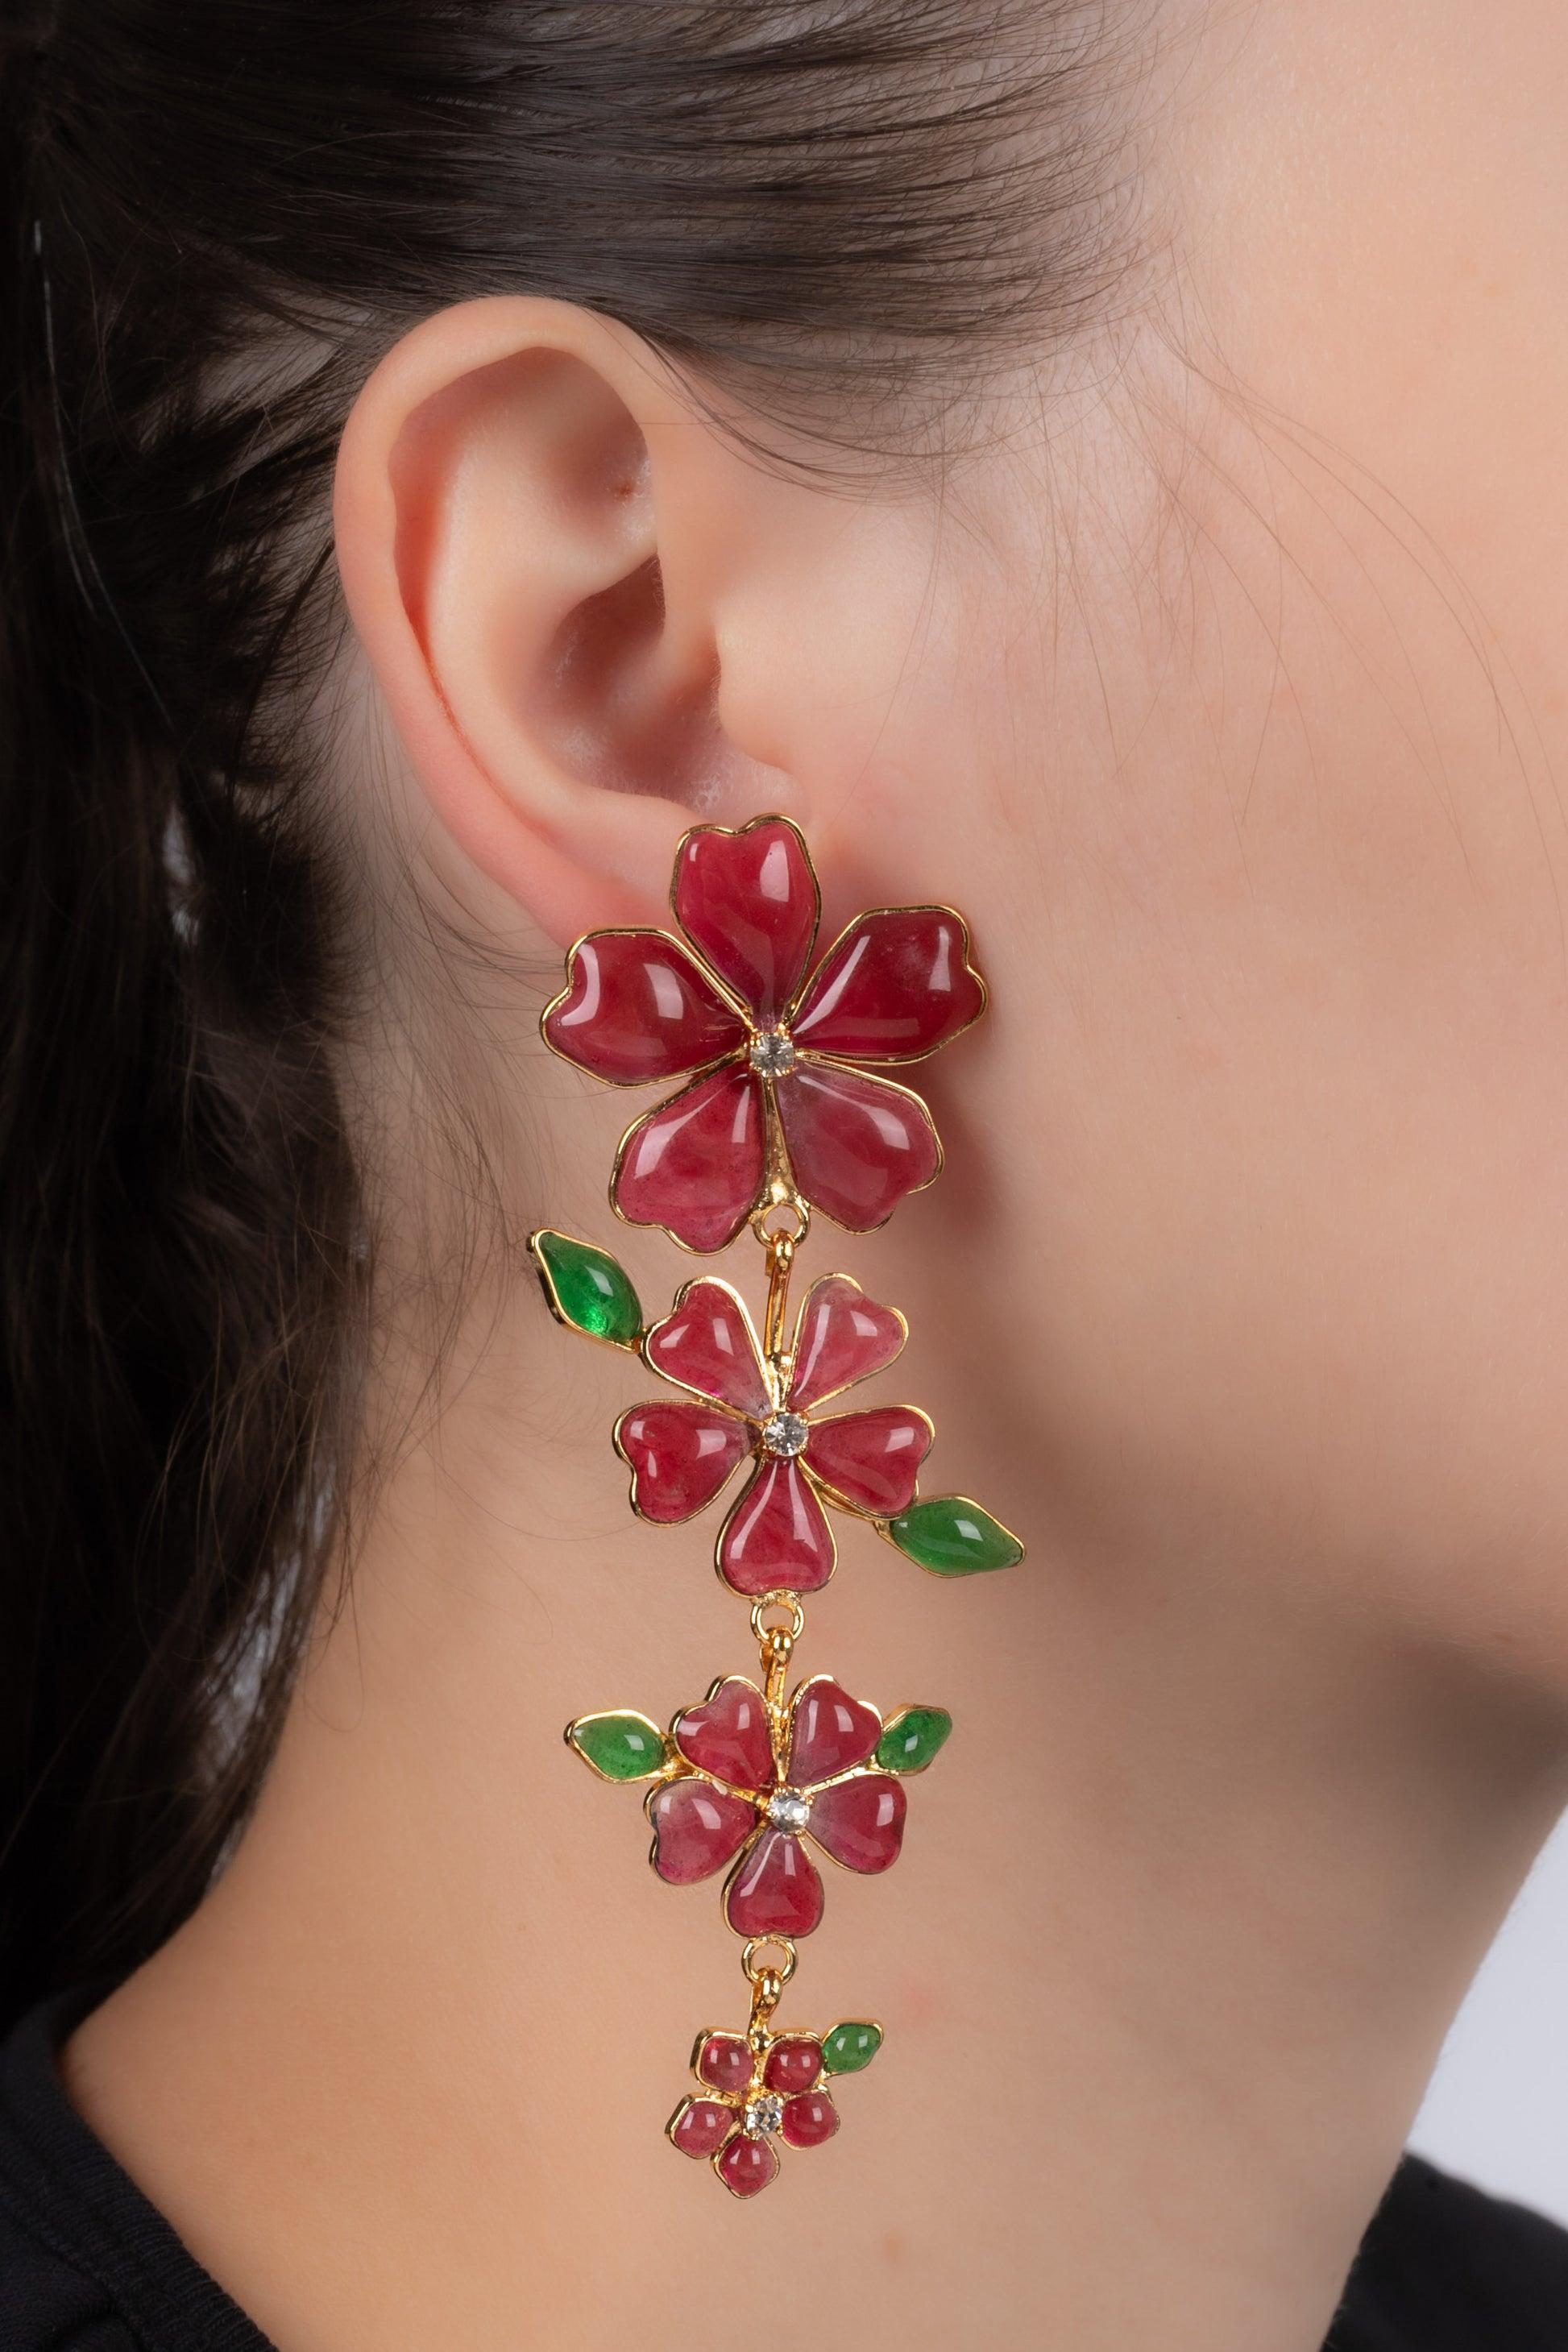 Augustine - Golden metal earrings with glass paste in red and dark red tones.

Additional information:
Condition: Very good condition
Dimensions: Length: 9.5 cm

Seller Reference: BO247